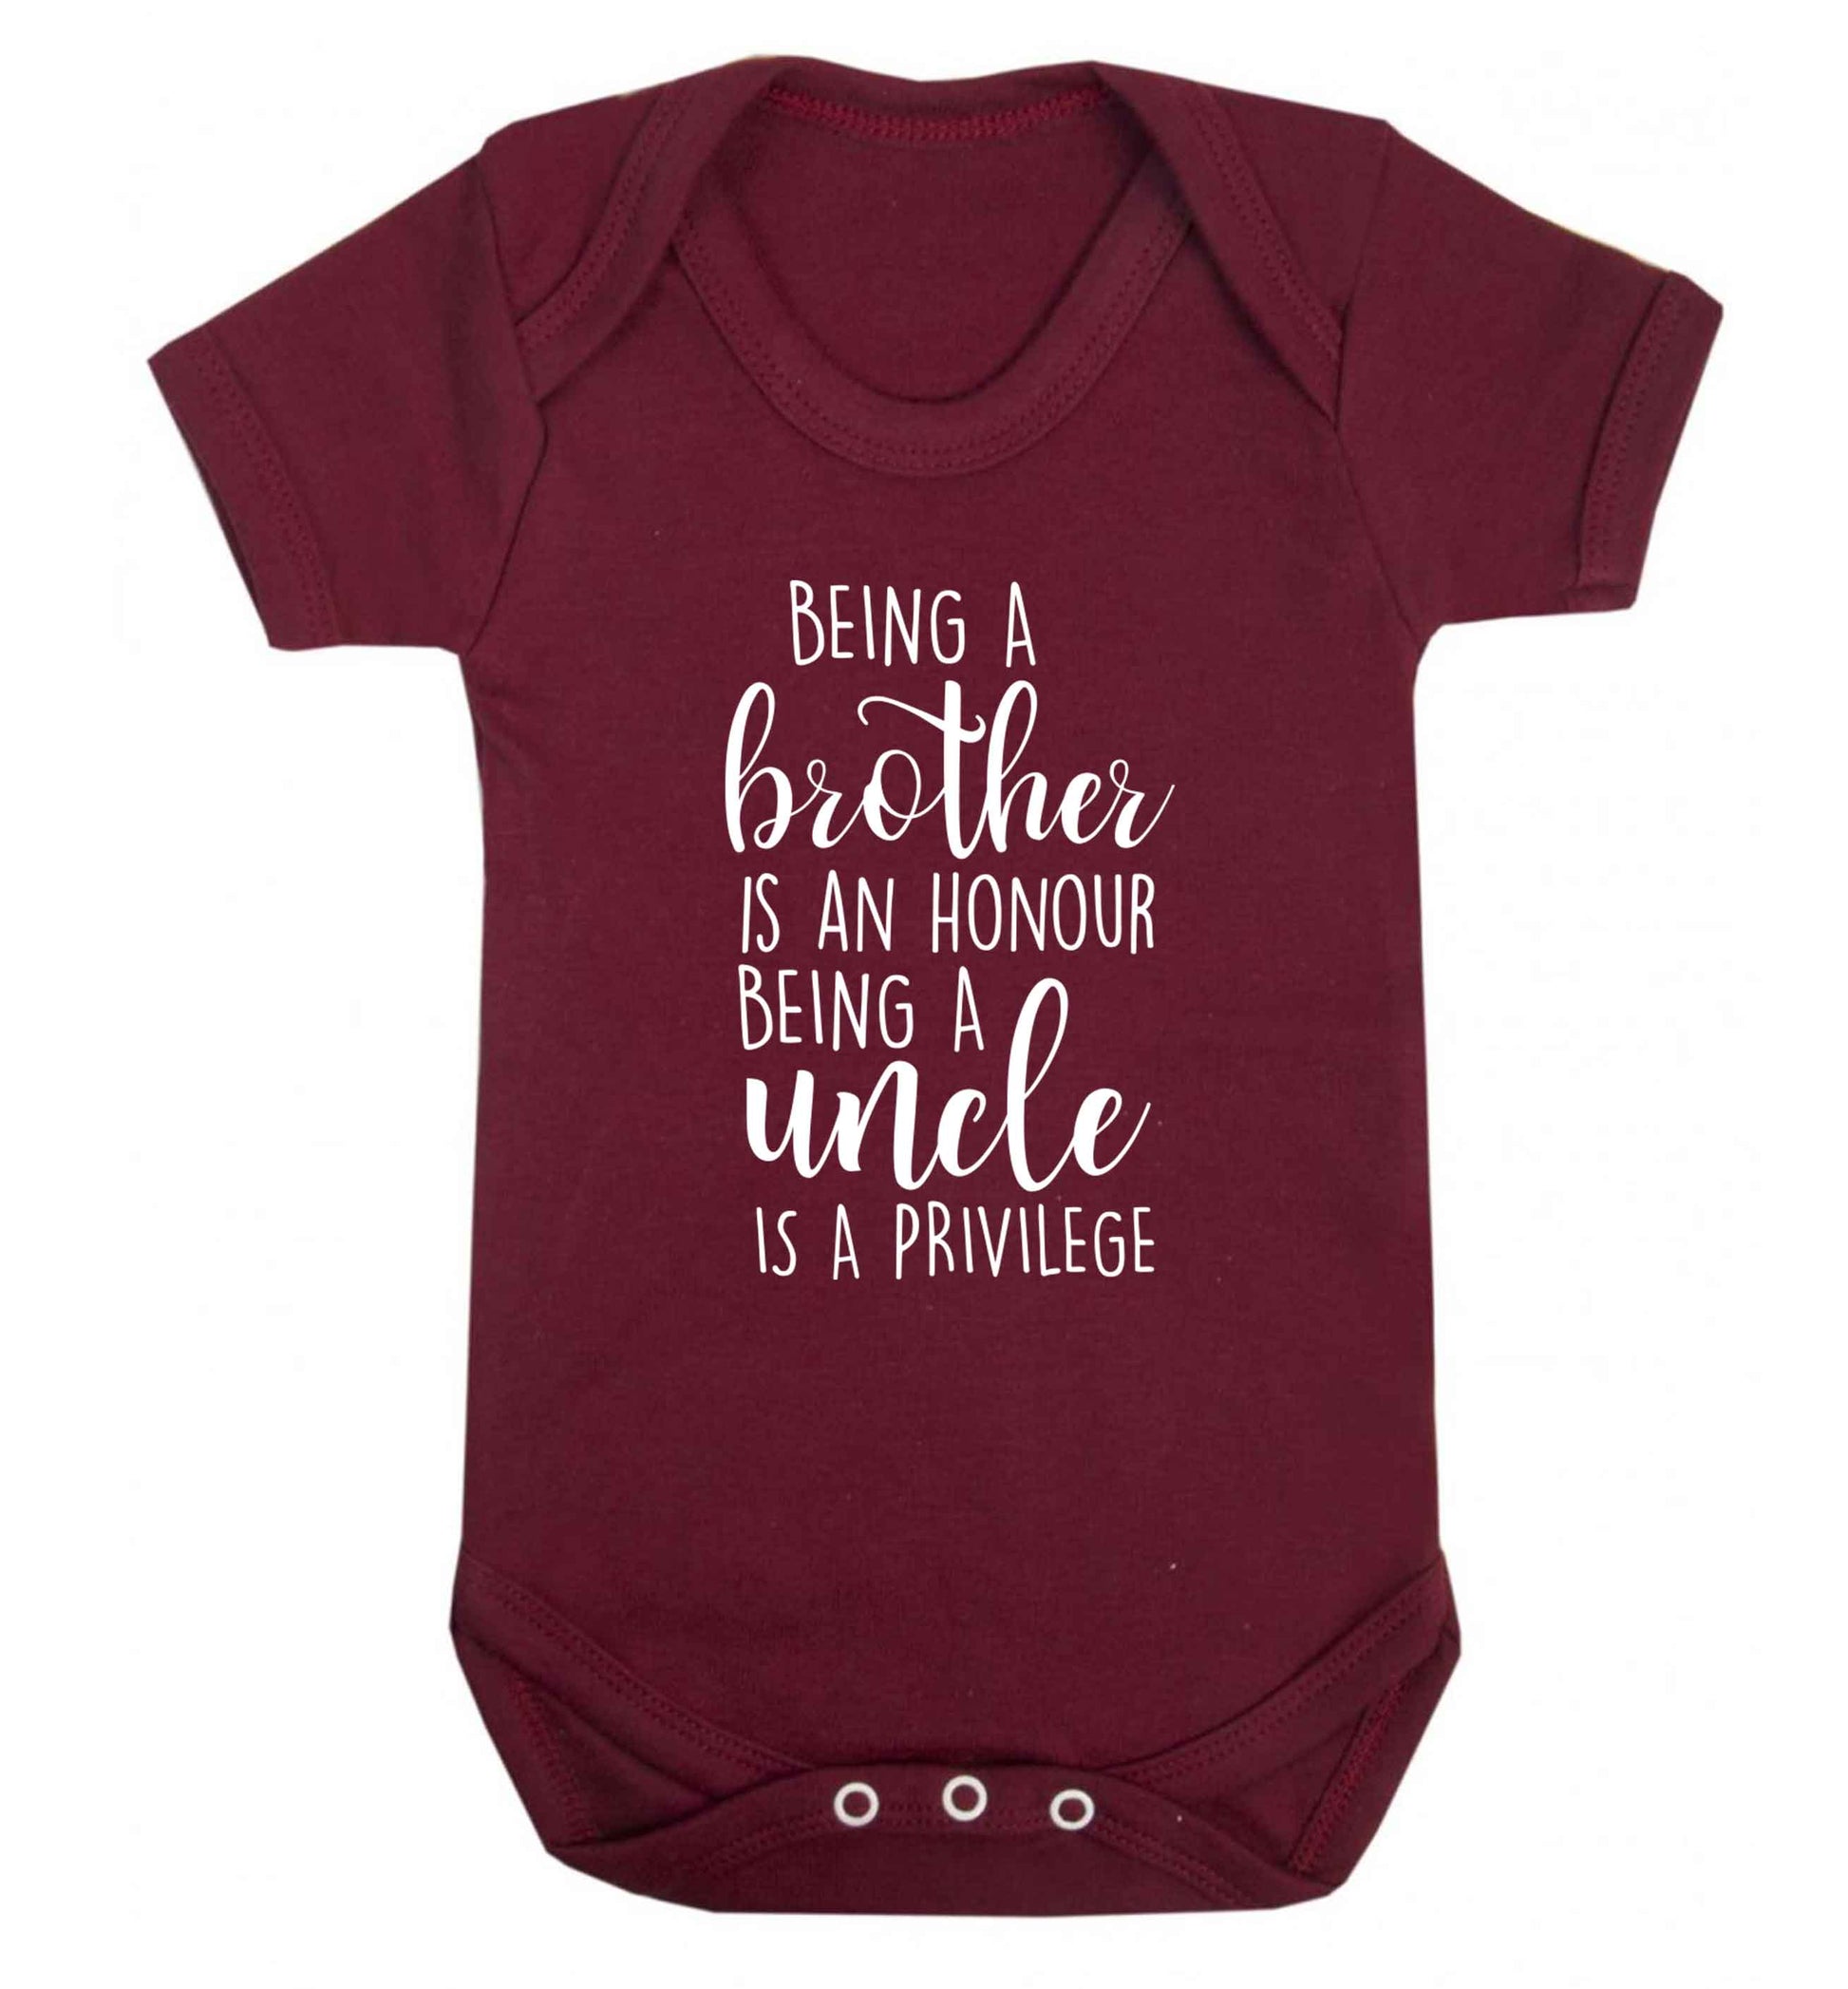 Being a brother is an honour being an uncle is a privilege Baby Vest maroon 18-24 months